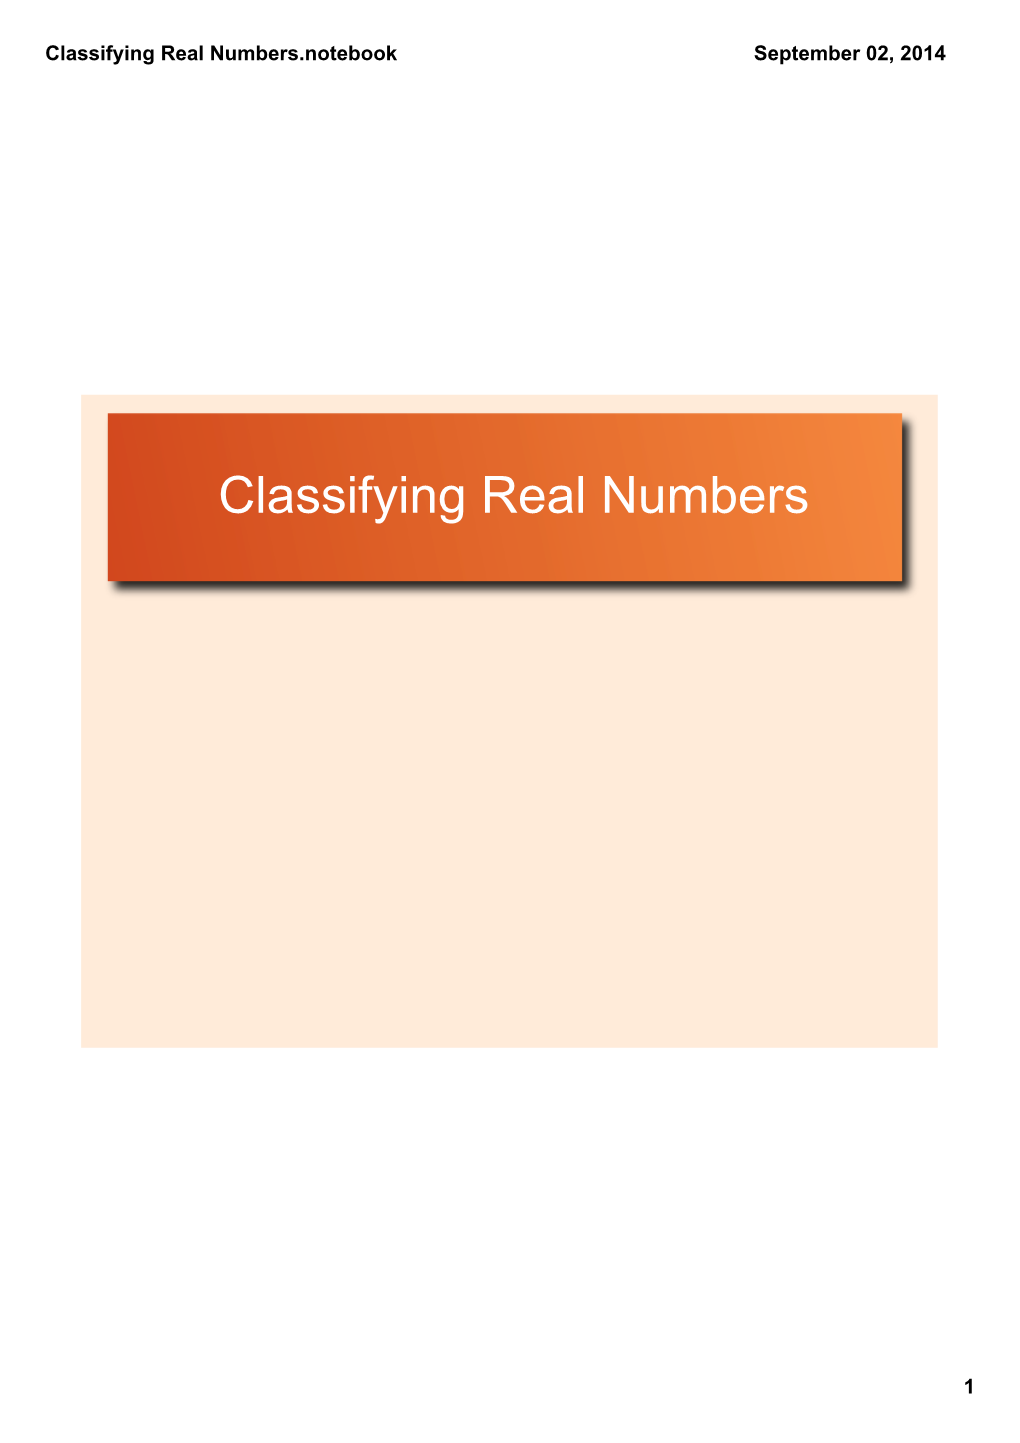 Classifying Real Numbers.Notebook September 02, 2014